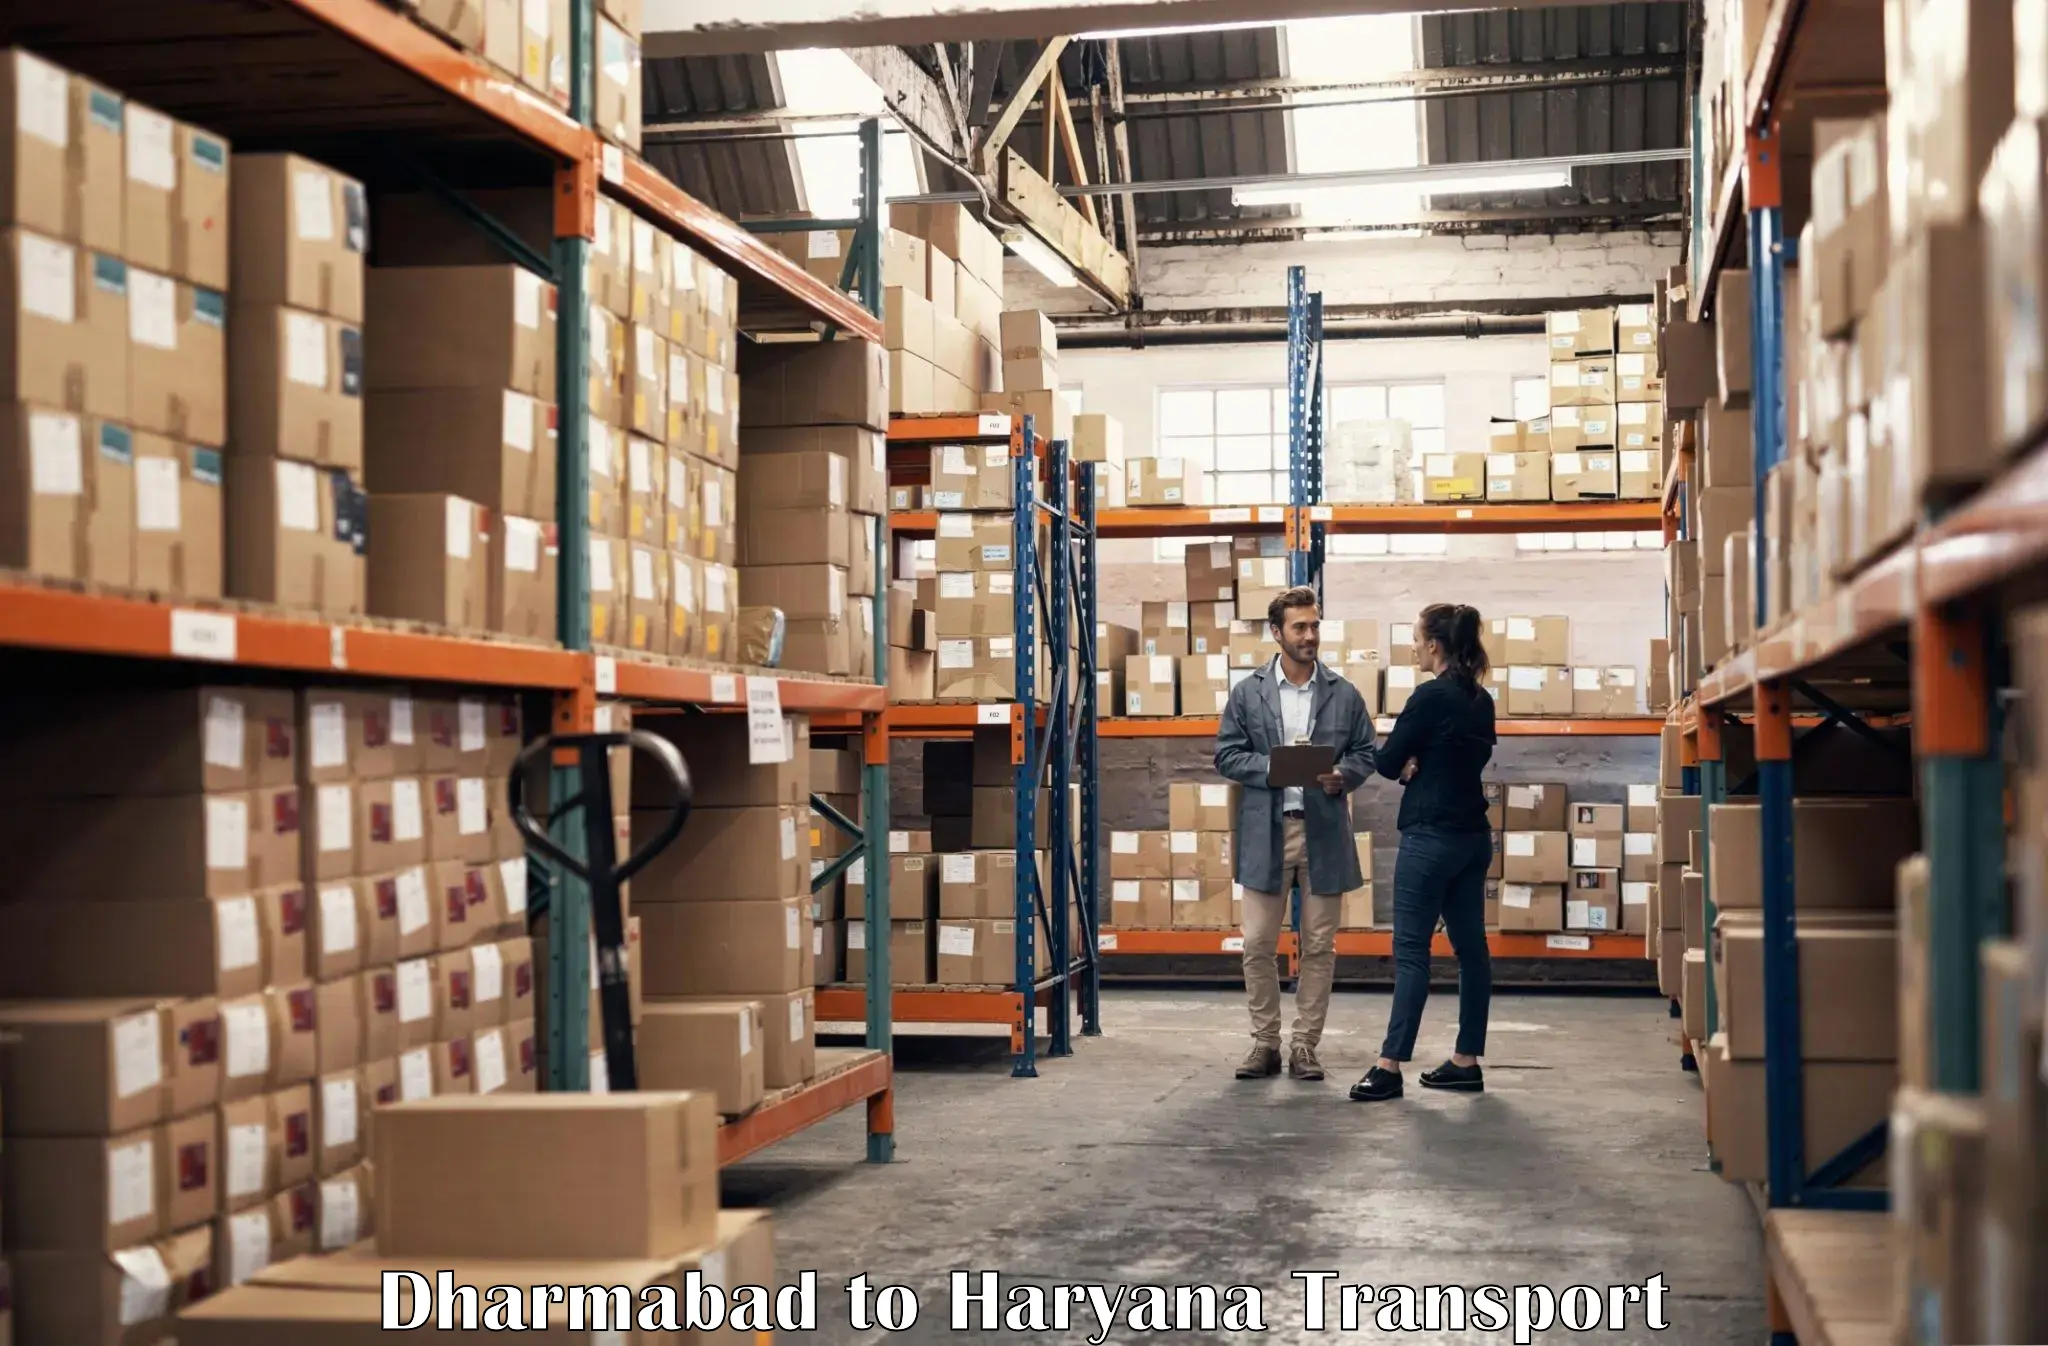 Shipping partner Dharmabad to Pinjore